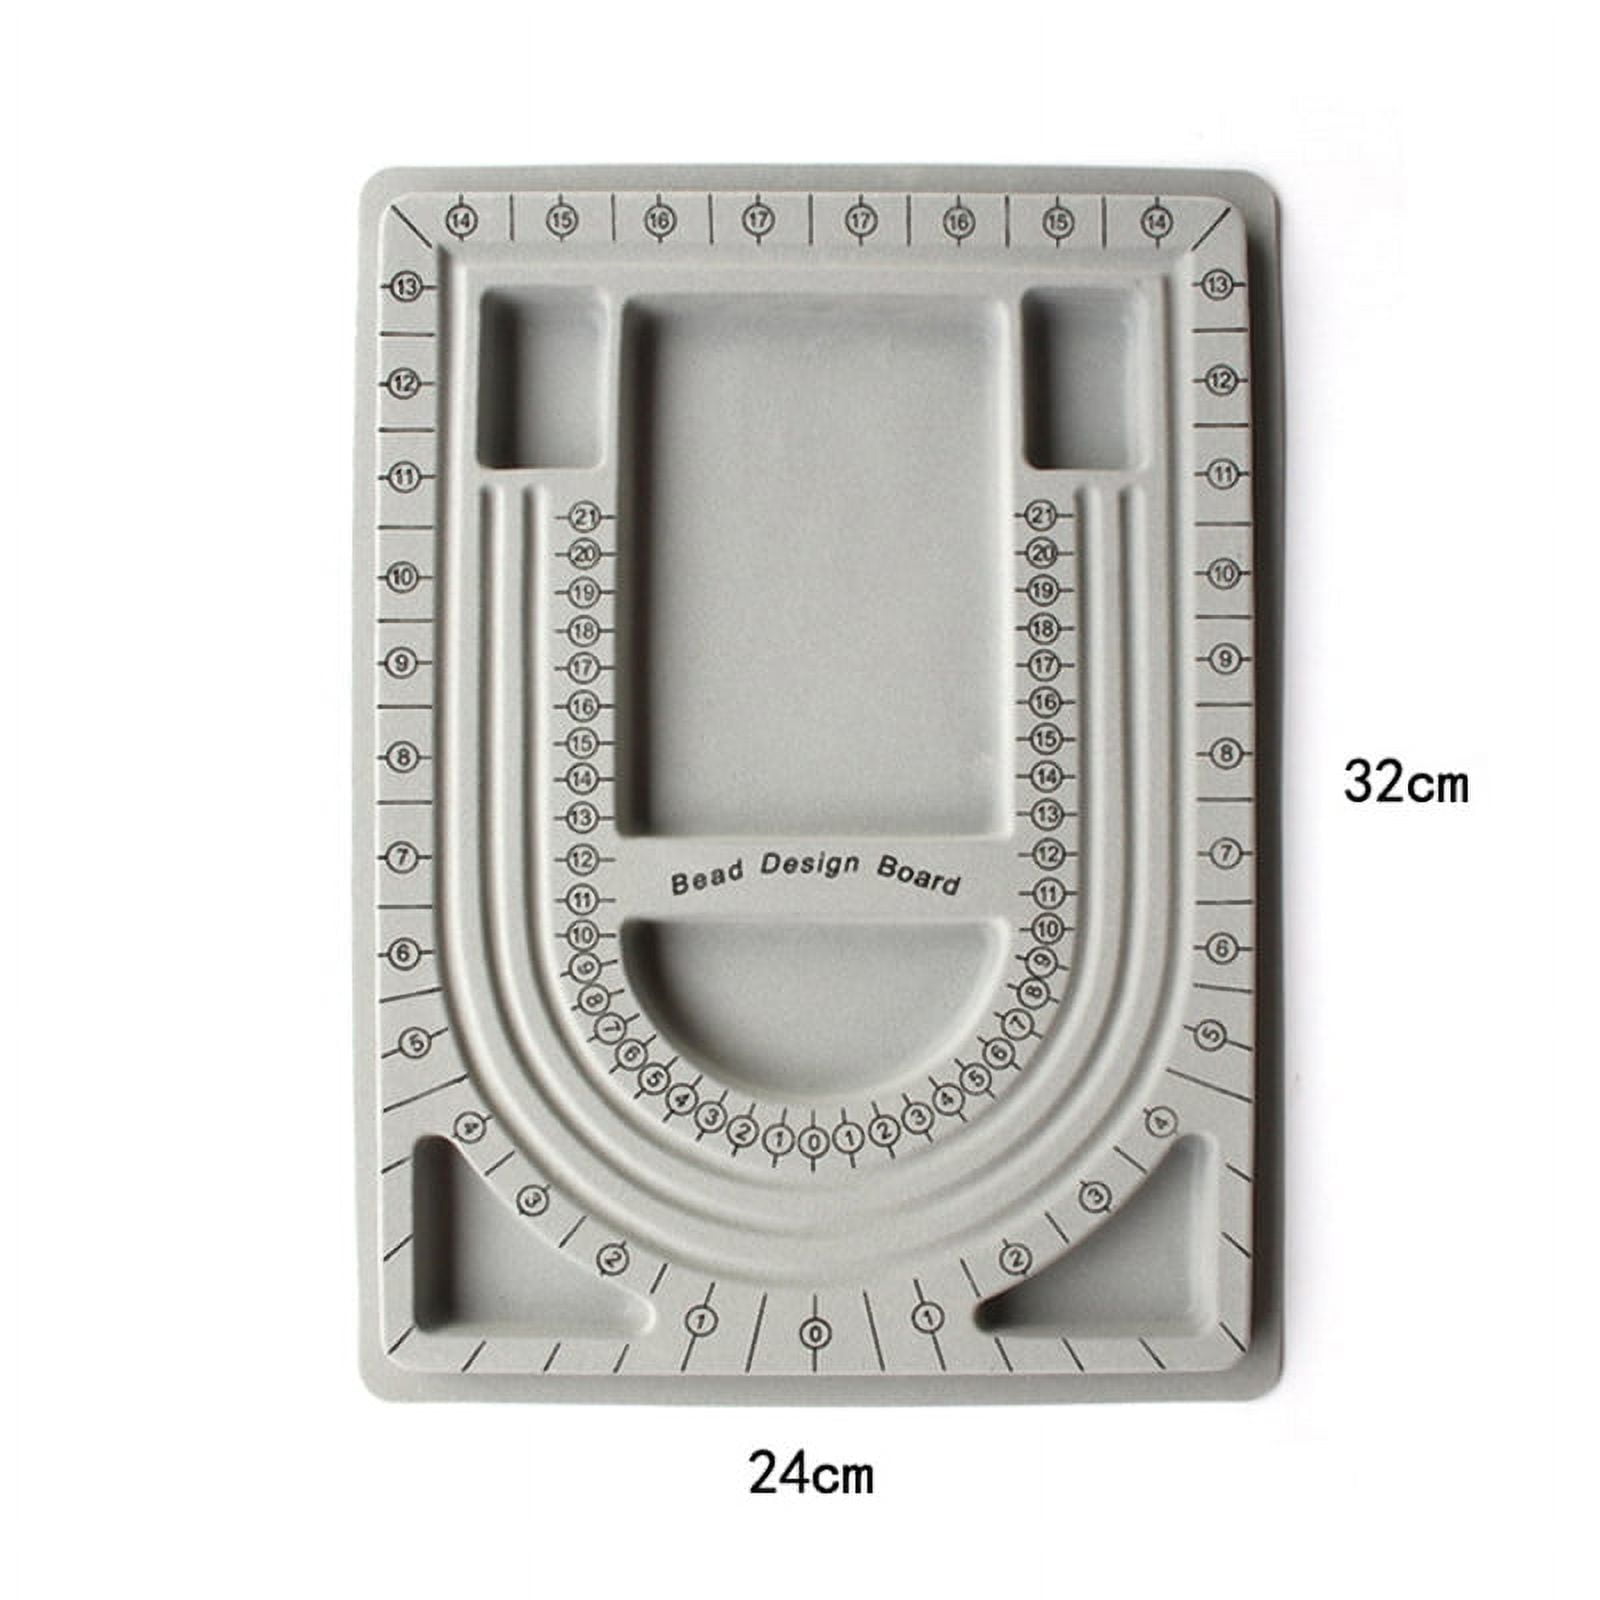 2pcs jewelry tools bead tray for jewelry making bracelet design